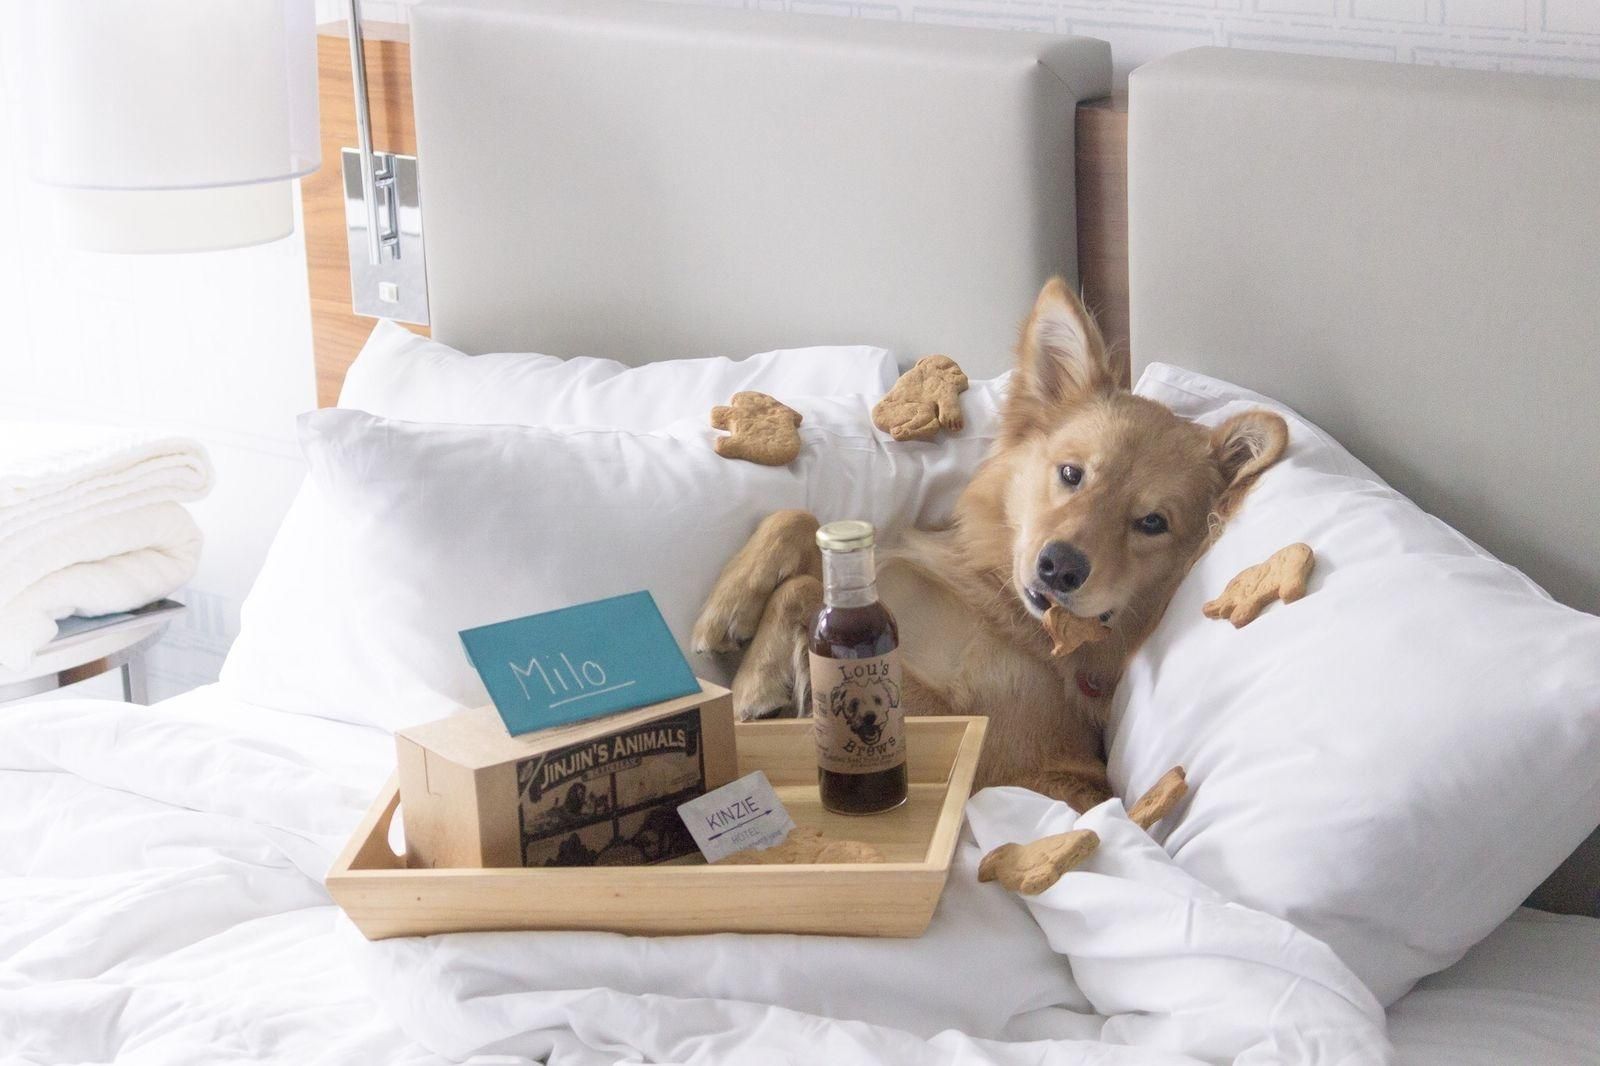 Golden retriever under covers and surrounded by dog treats in a bed at the Kinzie Hotel in Chicago